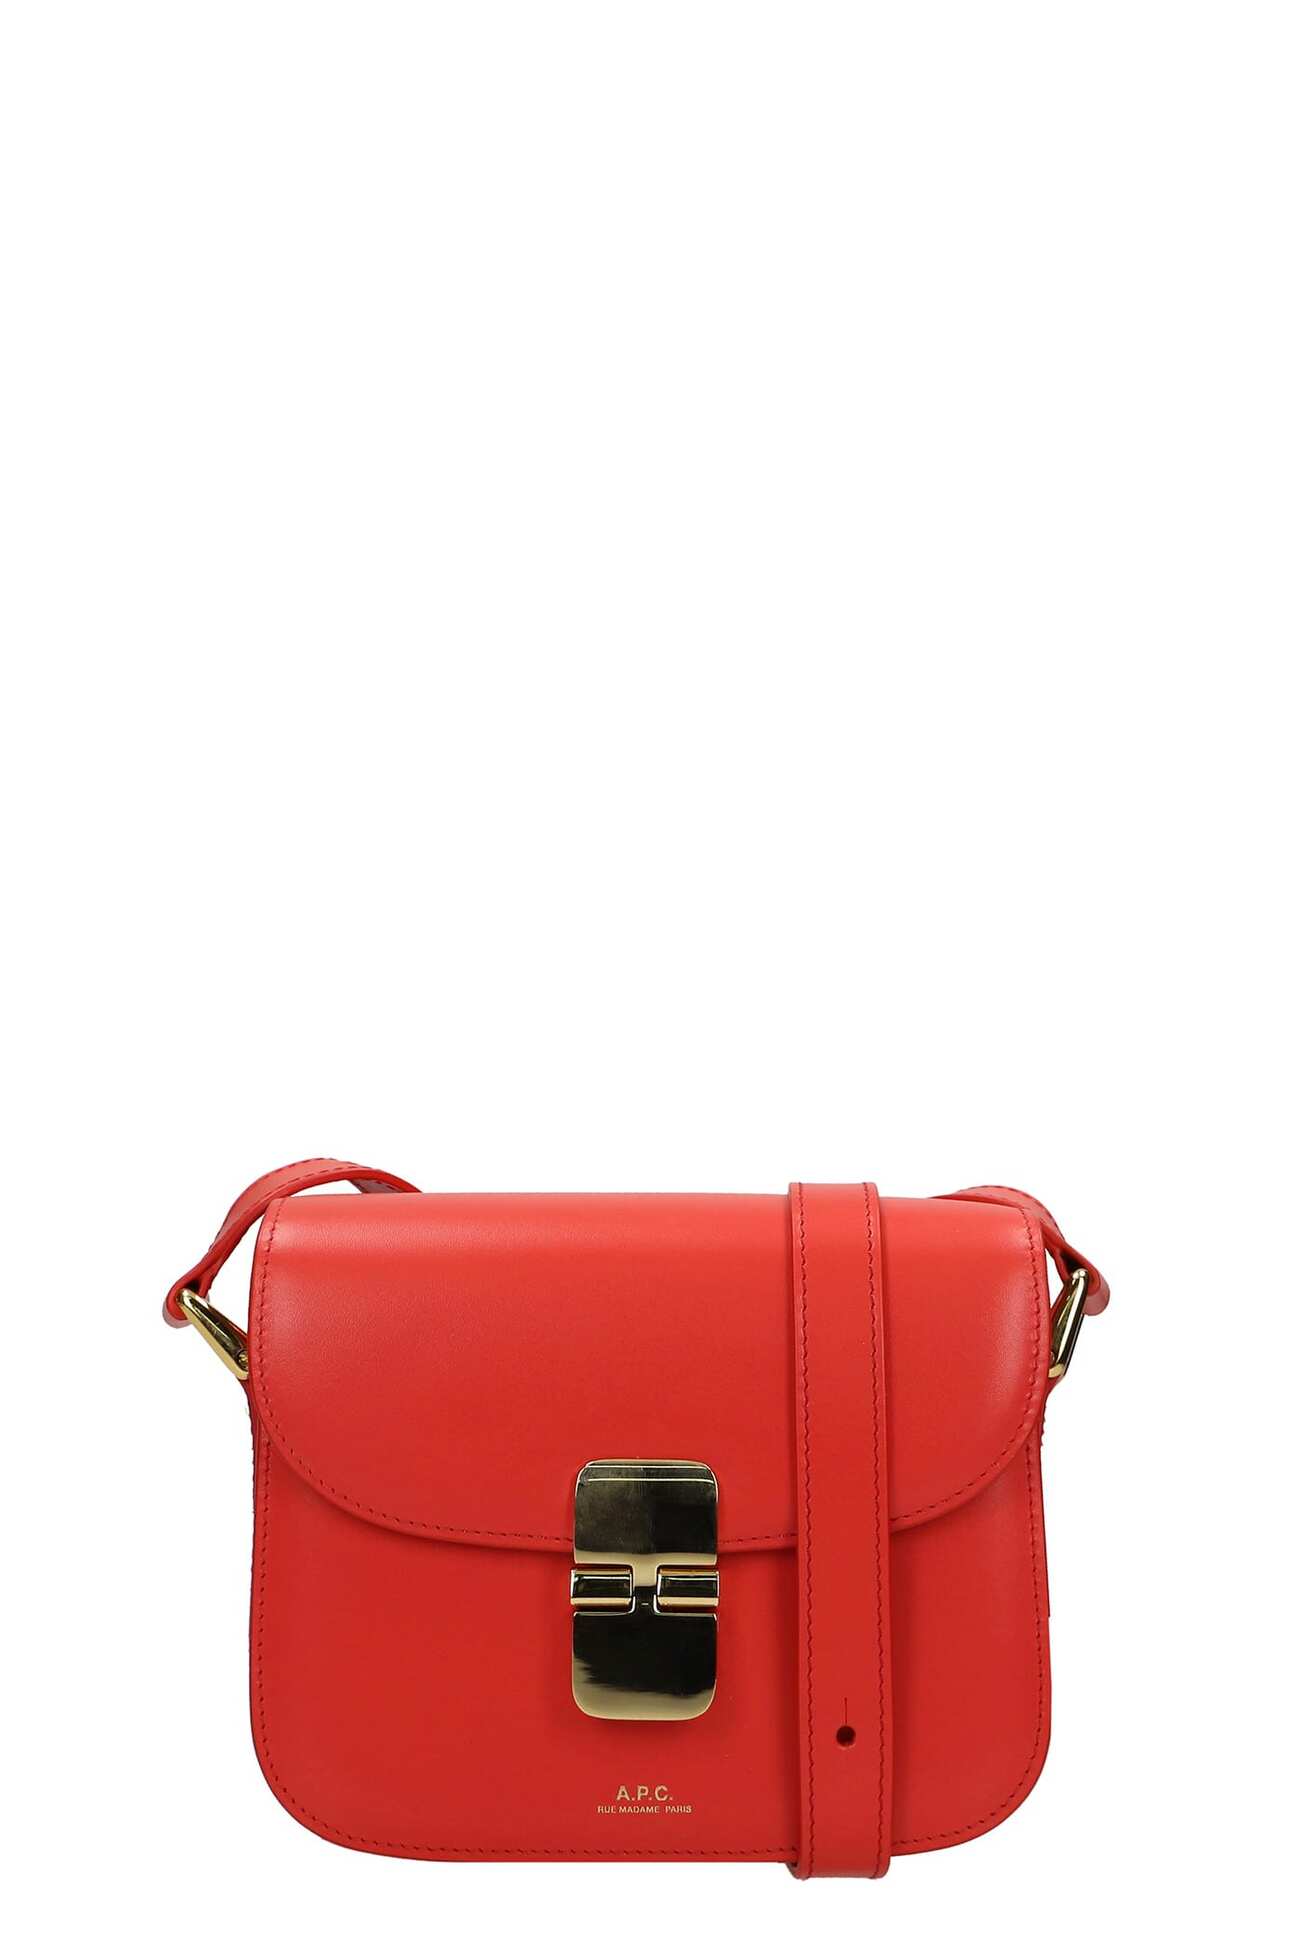 A.P.C. A.P.C. Grace Shoulder Bag In Red Leather